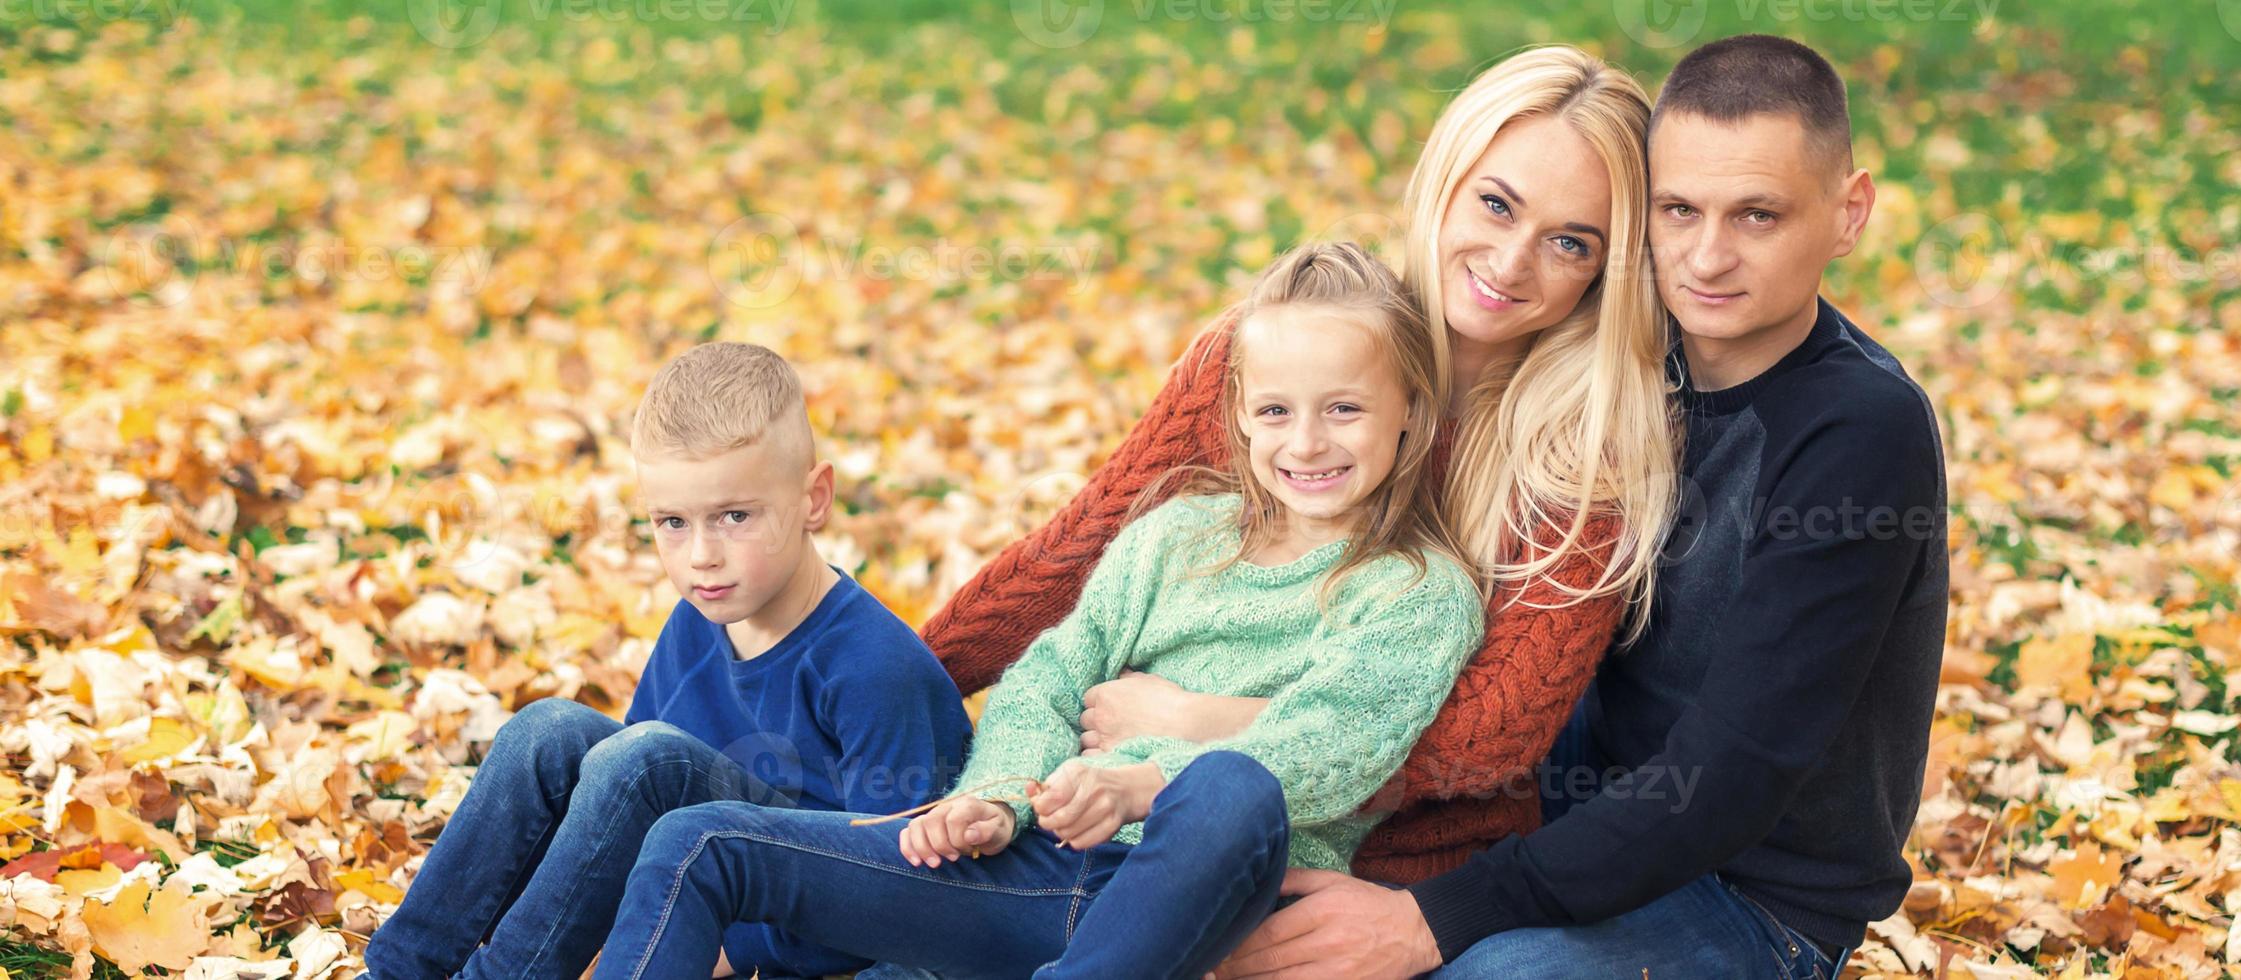 Portrait of young family sitting in autumn leaves photo